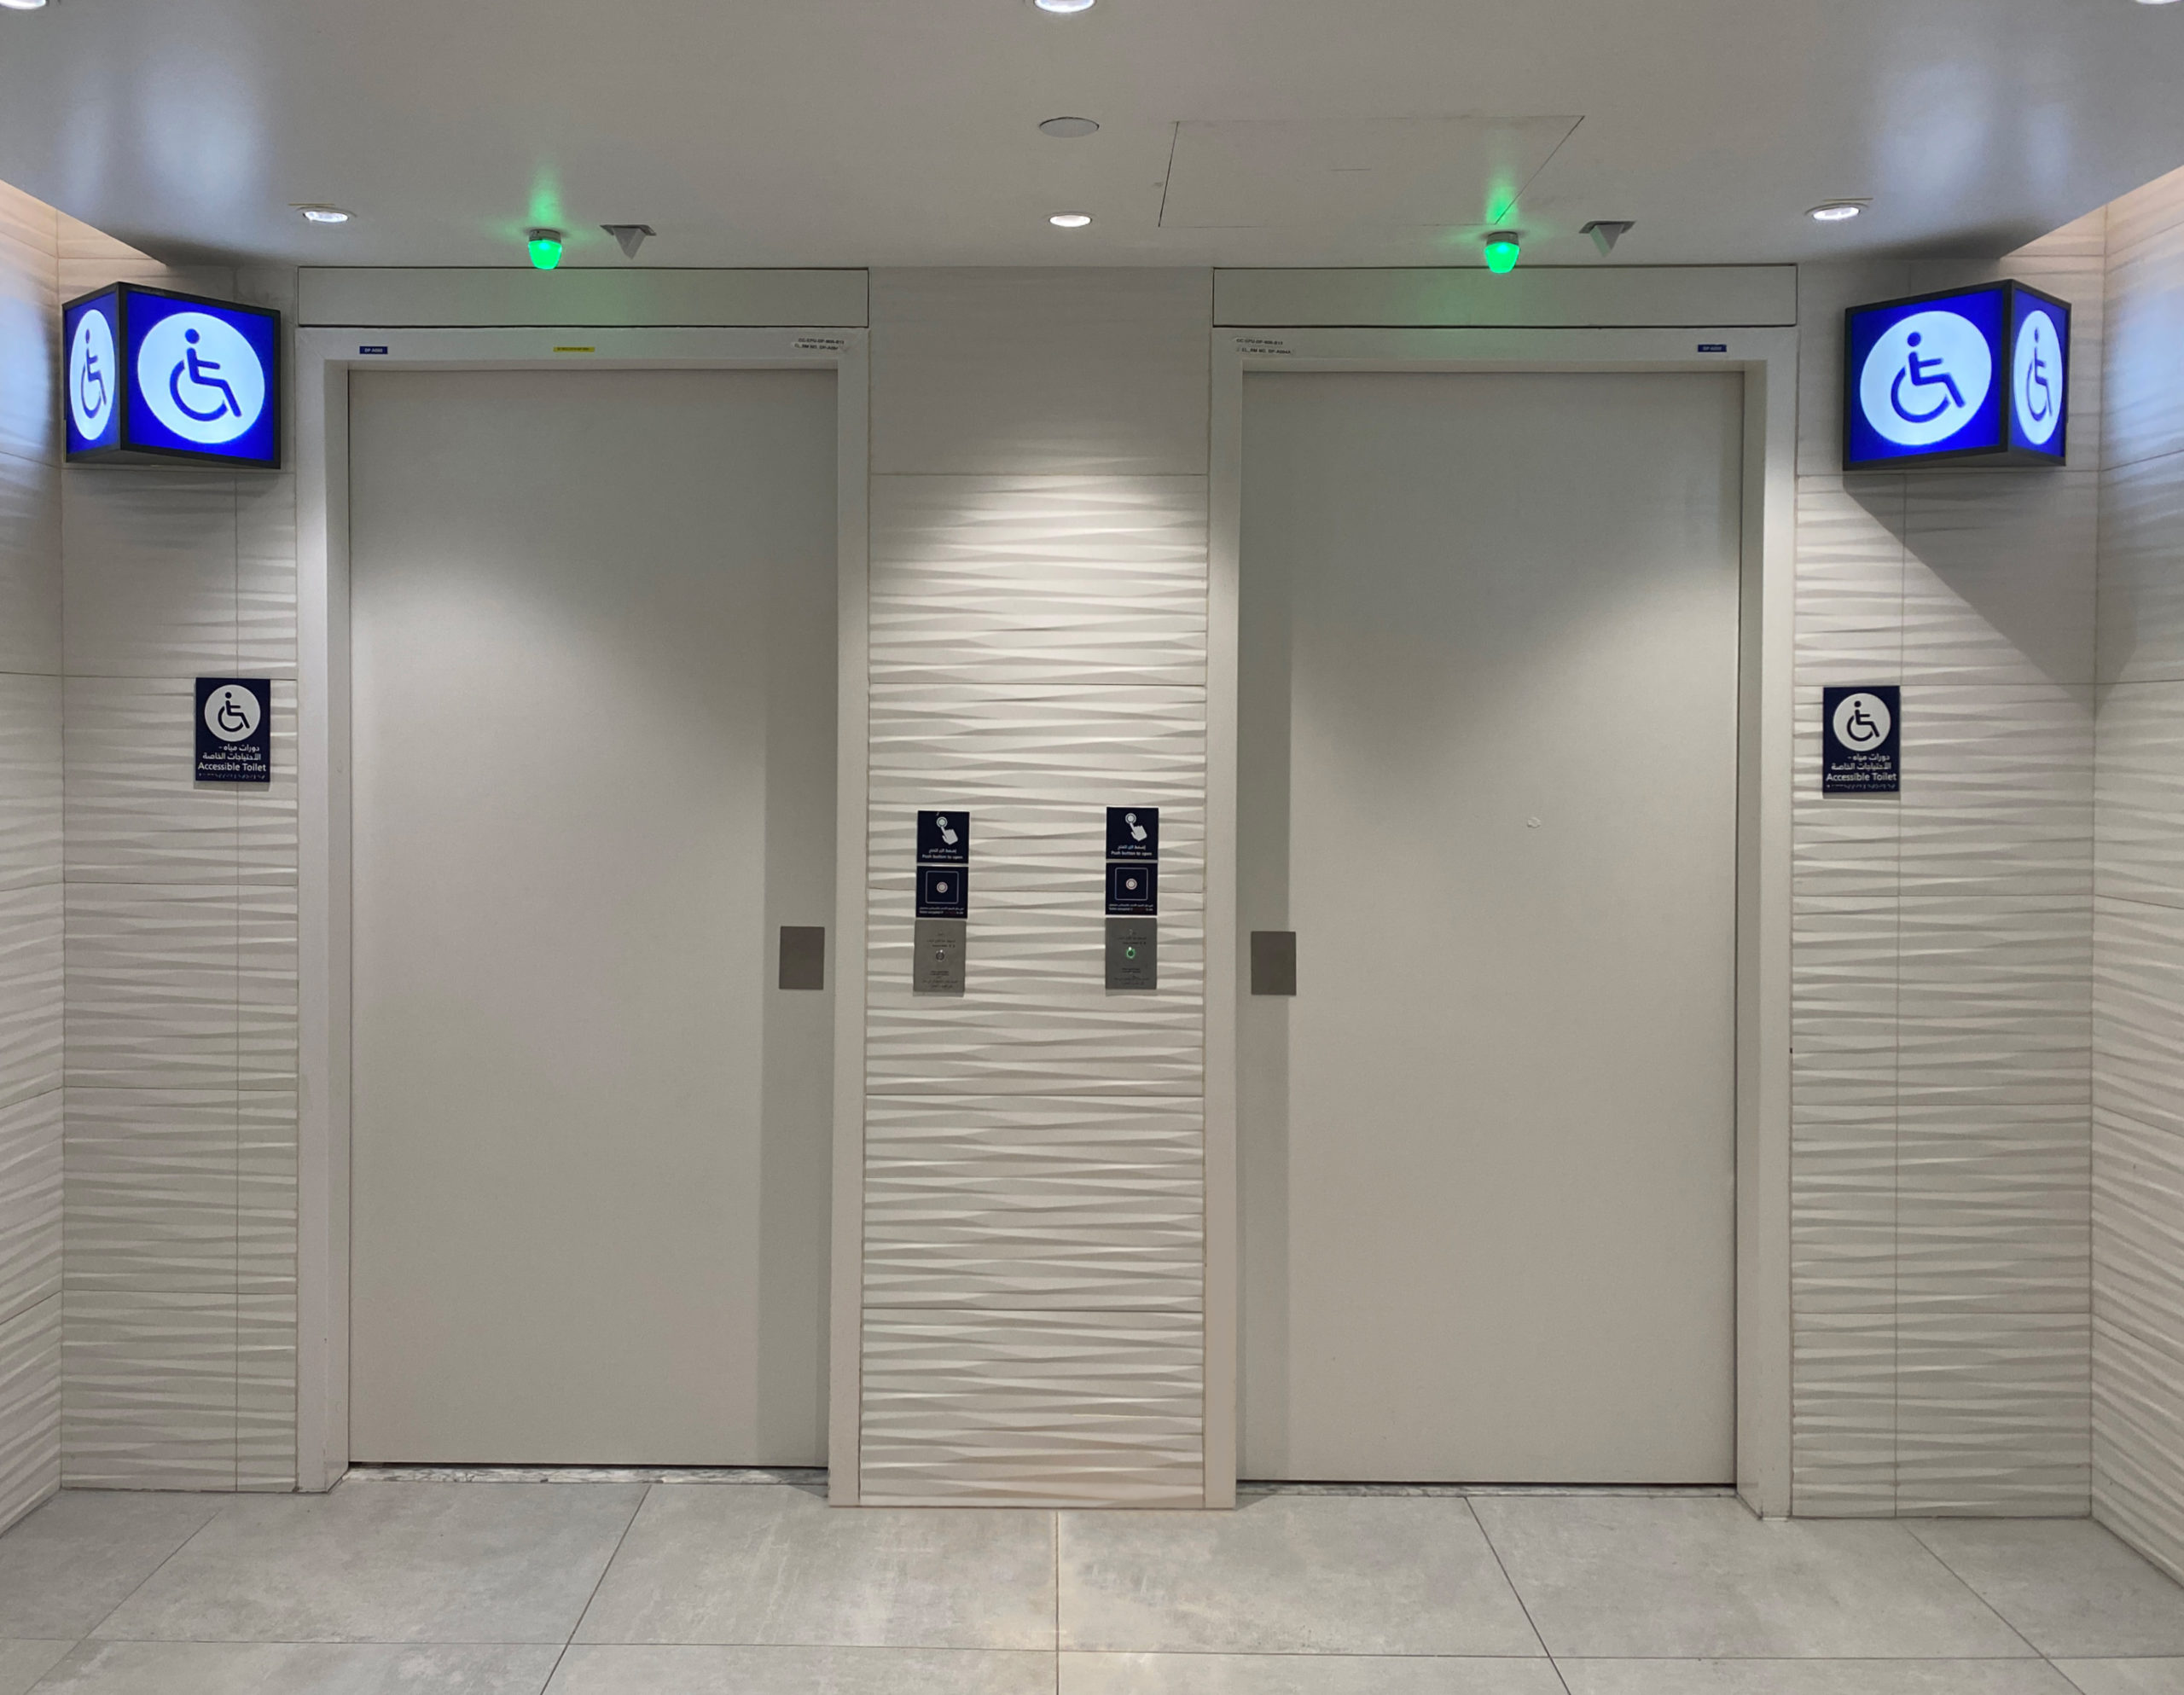 MOTION4 installs EvoDrive+ automatic doors in the PRM toilets at Dubai Airport